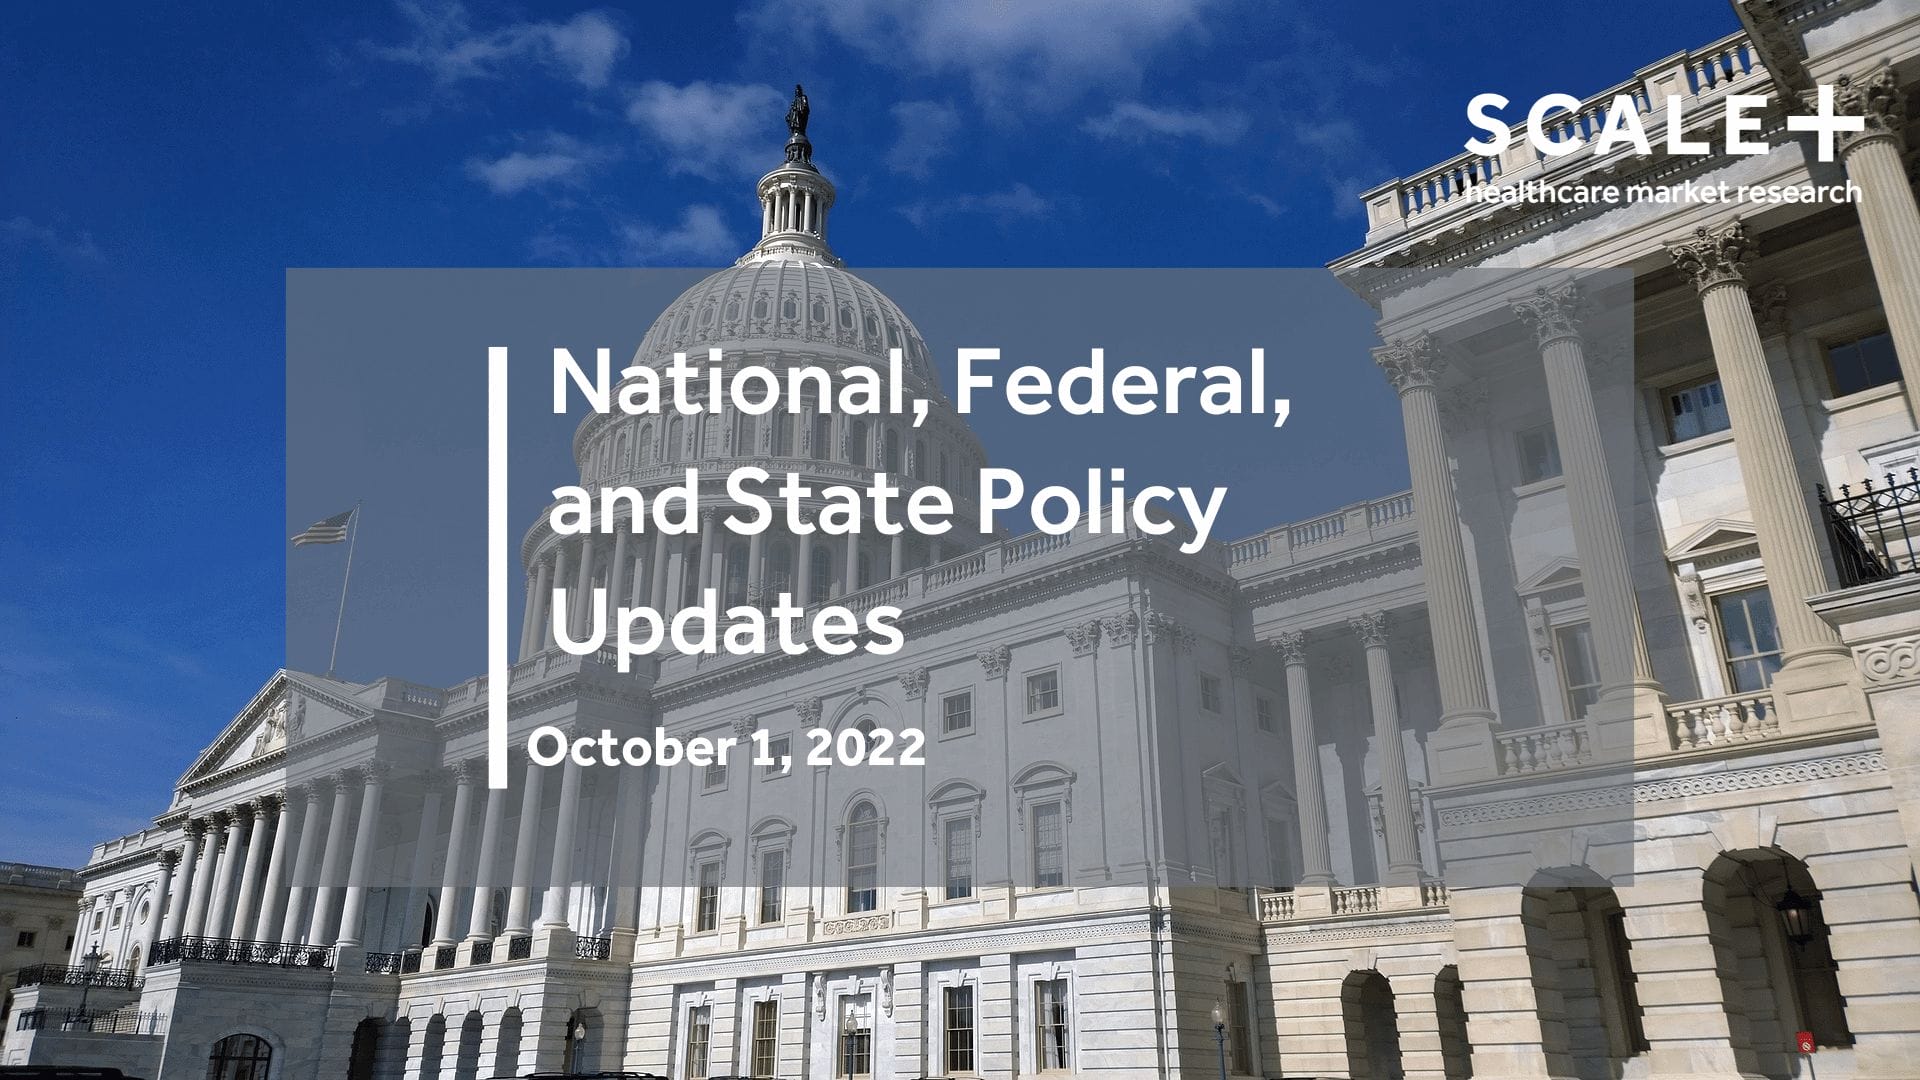 National, Federal and State Policy Updates: October 1, 2022